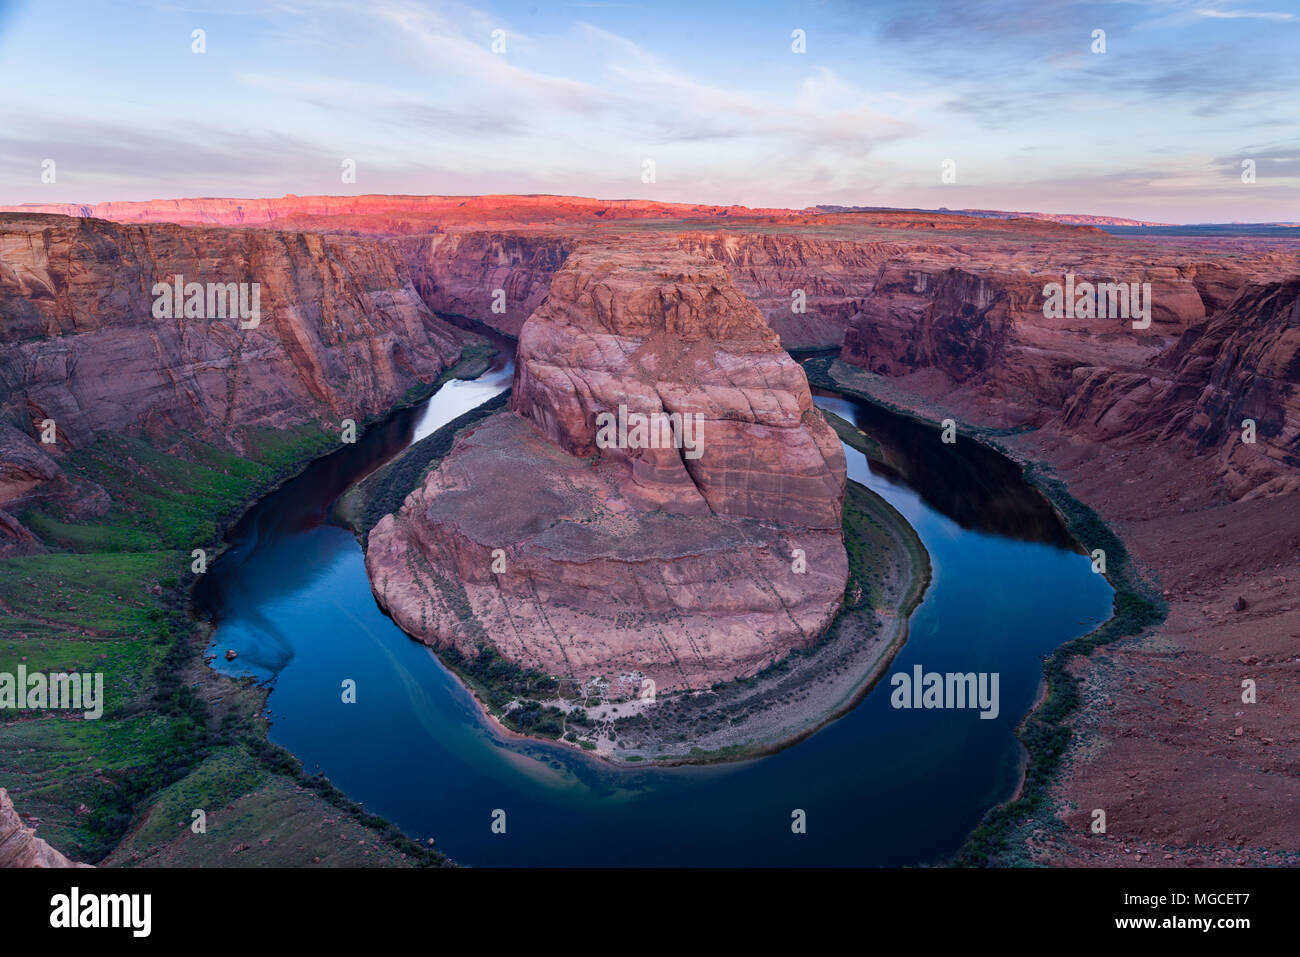 Horseshoe Bend at sunrise with the Colorado river flowing around through the canyon, Arizona Stock Photo